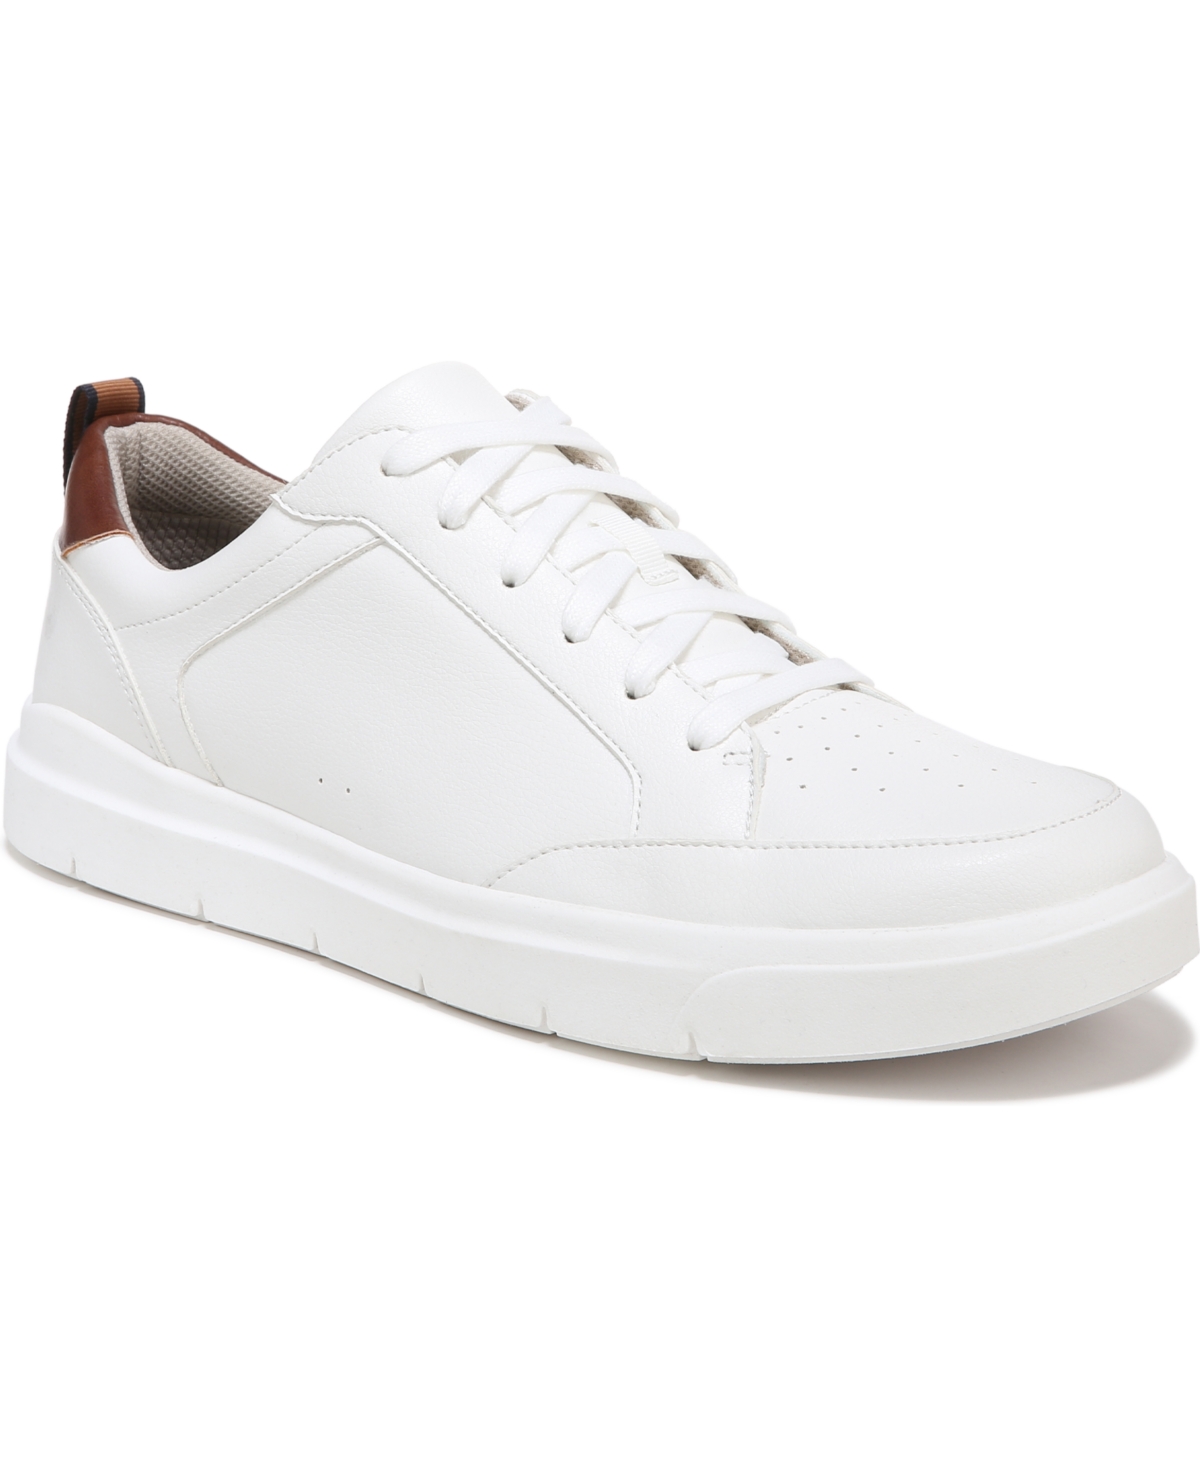 Men's Catch Thrills Lace Up Sneakers - White Synthetic Polyurethane